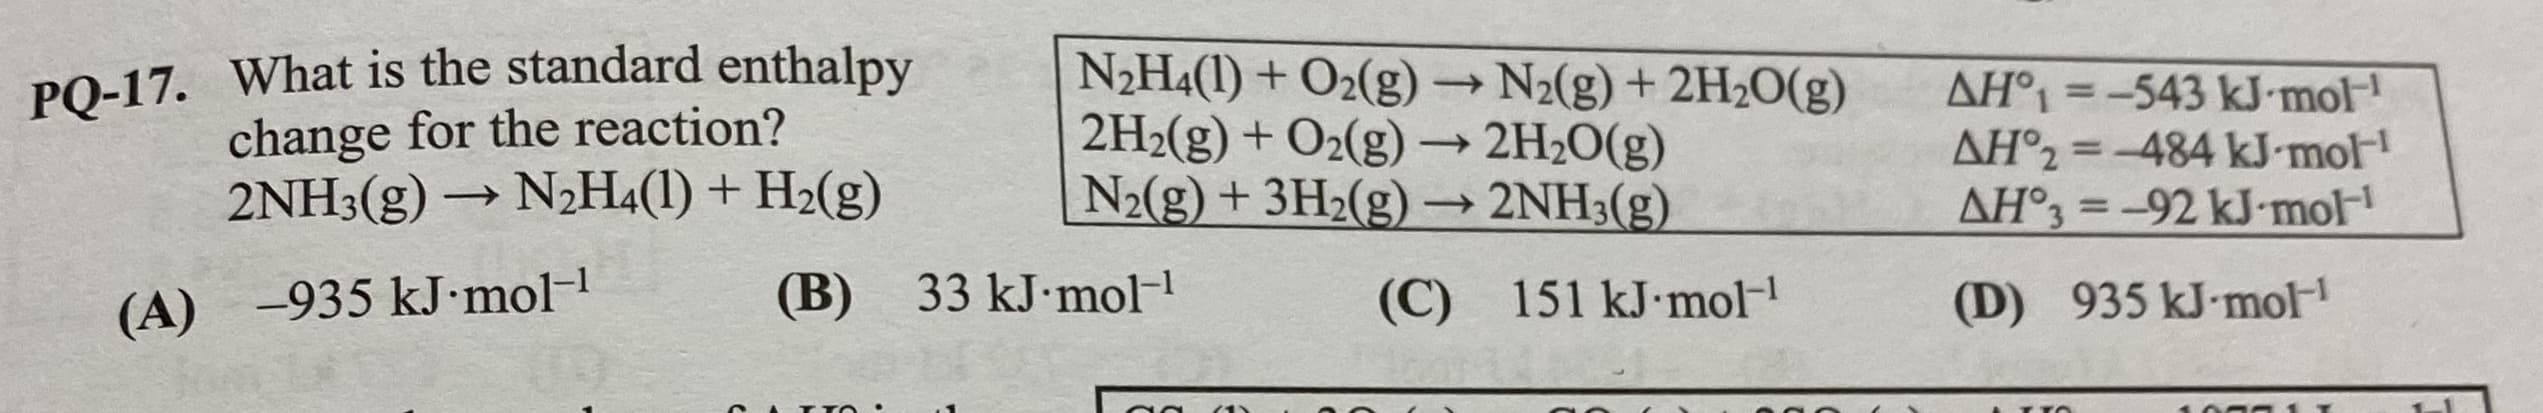 PQ-17. What is the standard enthalpy
change for the reaction?
2NH3(g) → N2H4(1) + H2(g)
N2H4(1) + O2(g) N2(g) + 2H2O(g)
2H2(g) + O2(g) –→ 2H2O(g)
N2(g) + 3H2(g) –→ 2NH3(g)
AH°1 =-543 kJ mol
AH°2 =-484 kJ mol
AH°3 = -92 kJ-mol
%3D
(B) 33 kJ•mol-
151 kJ mol-
(C)
(D) 935 kJ-mol
(A) -935 kJ•mol-1
